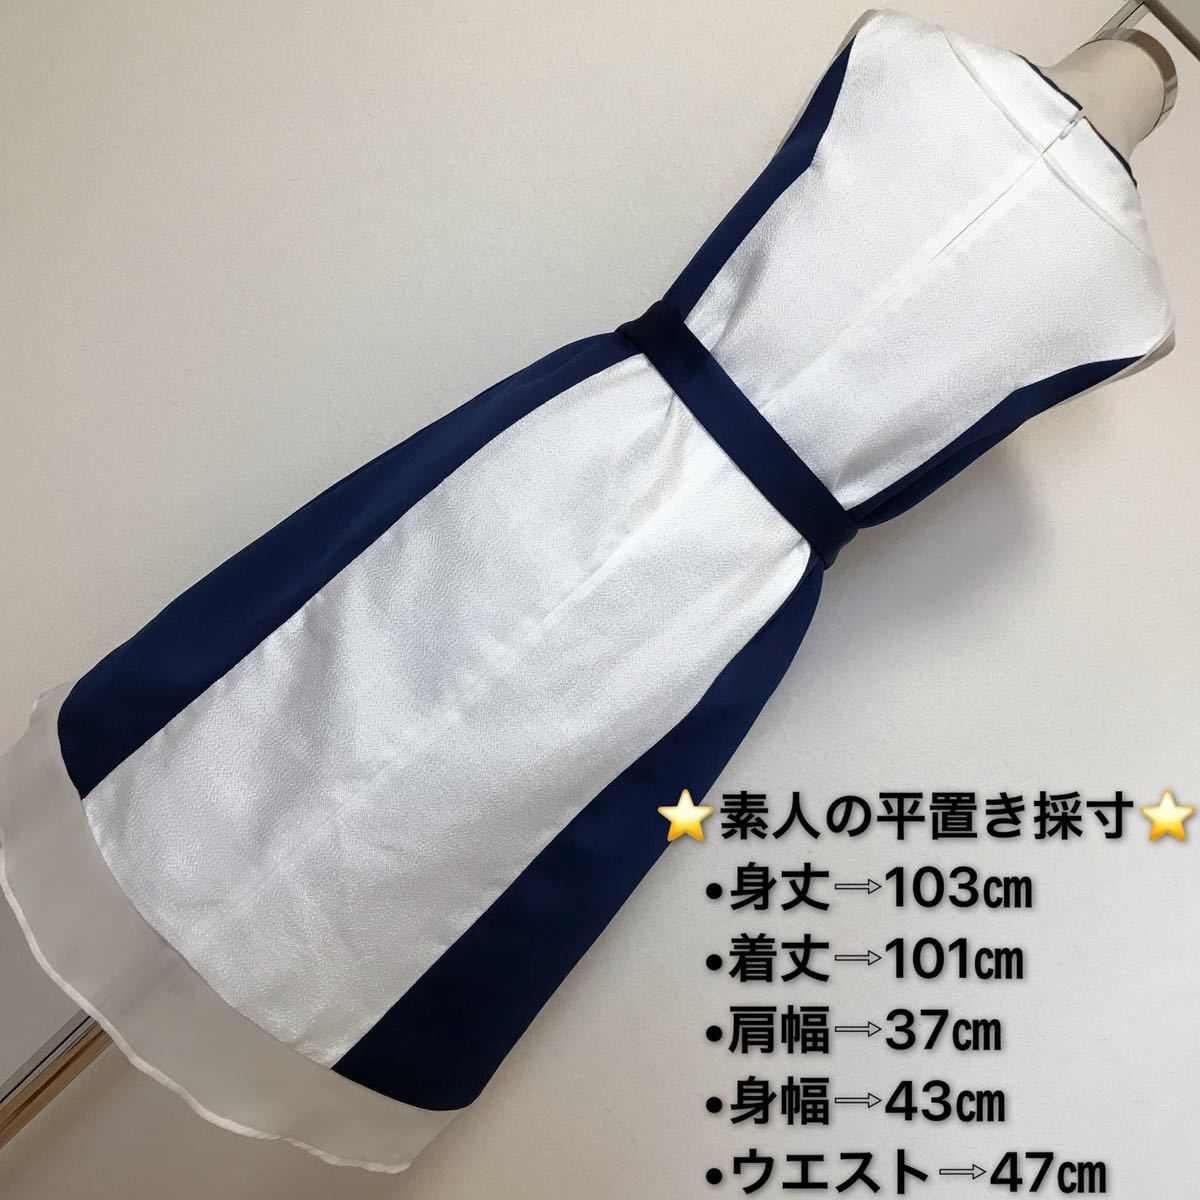 Chesty One-piece lady's first come, first served super-discount wonderful brand on goods pretty stylish going to school commuting te-to.ko wedding no sleeve ribbon 